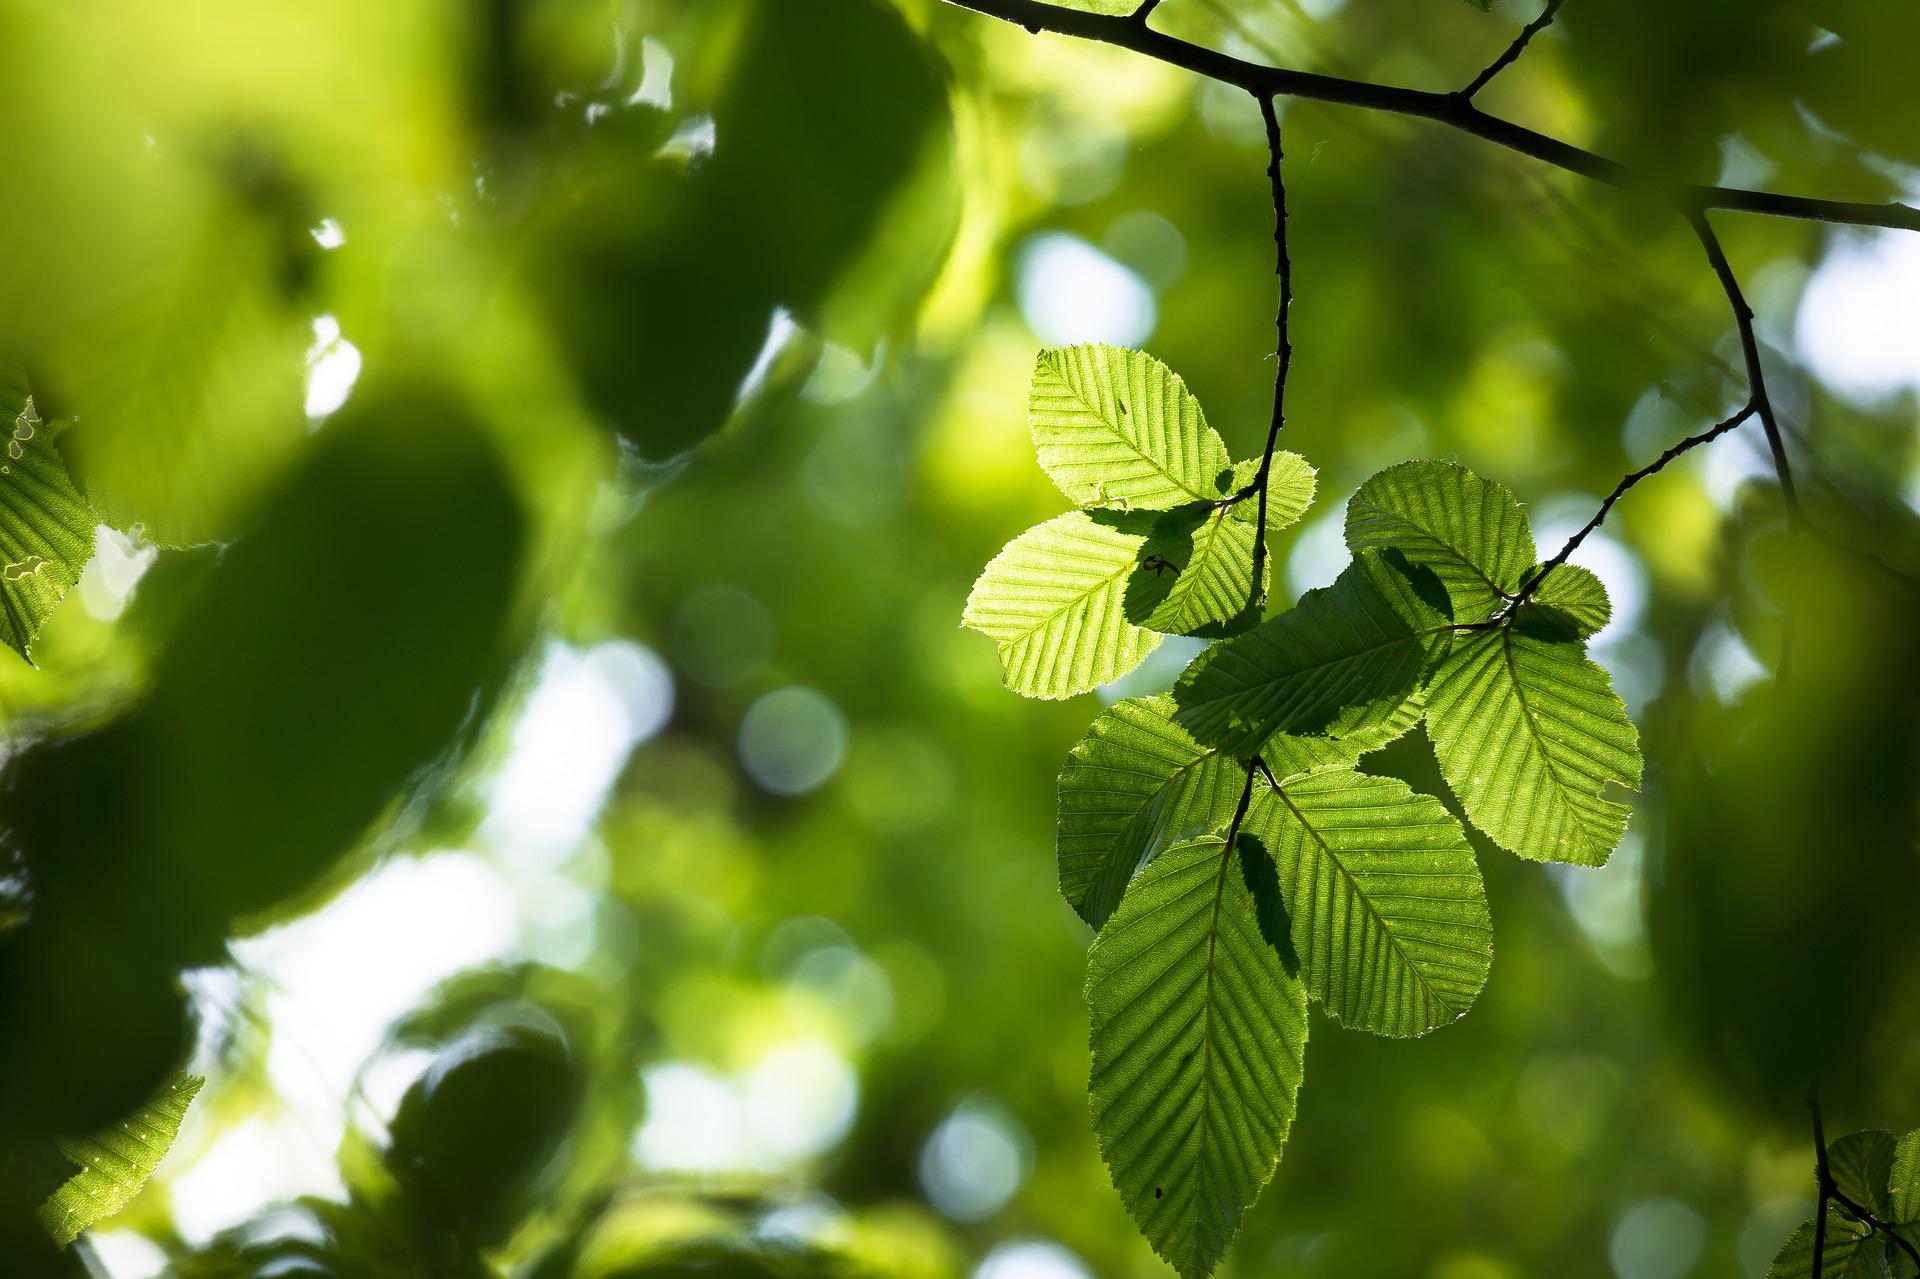 photo of beech leaves close up, with more beech leaves blurred in background.